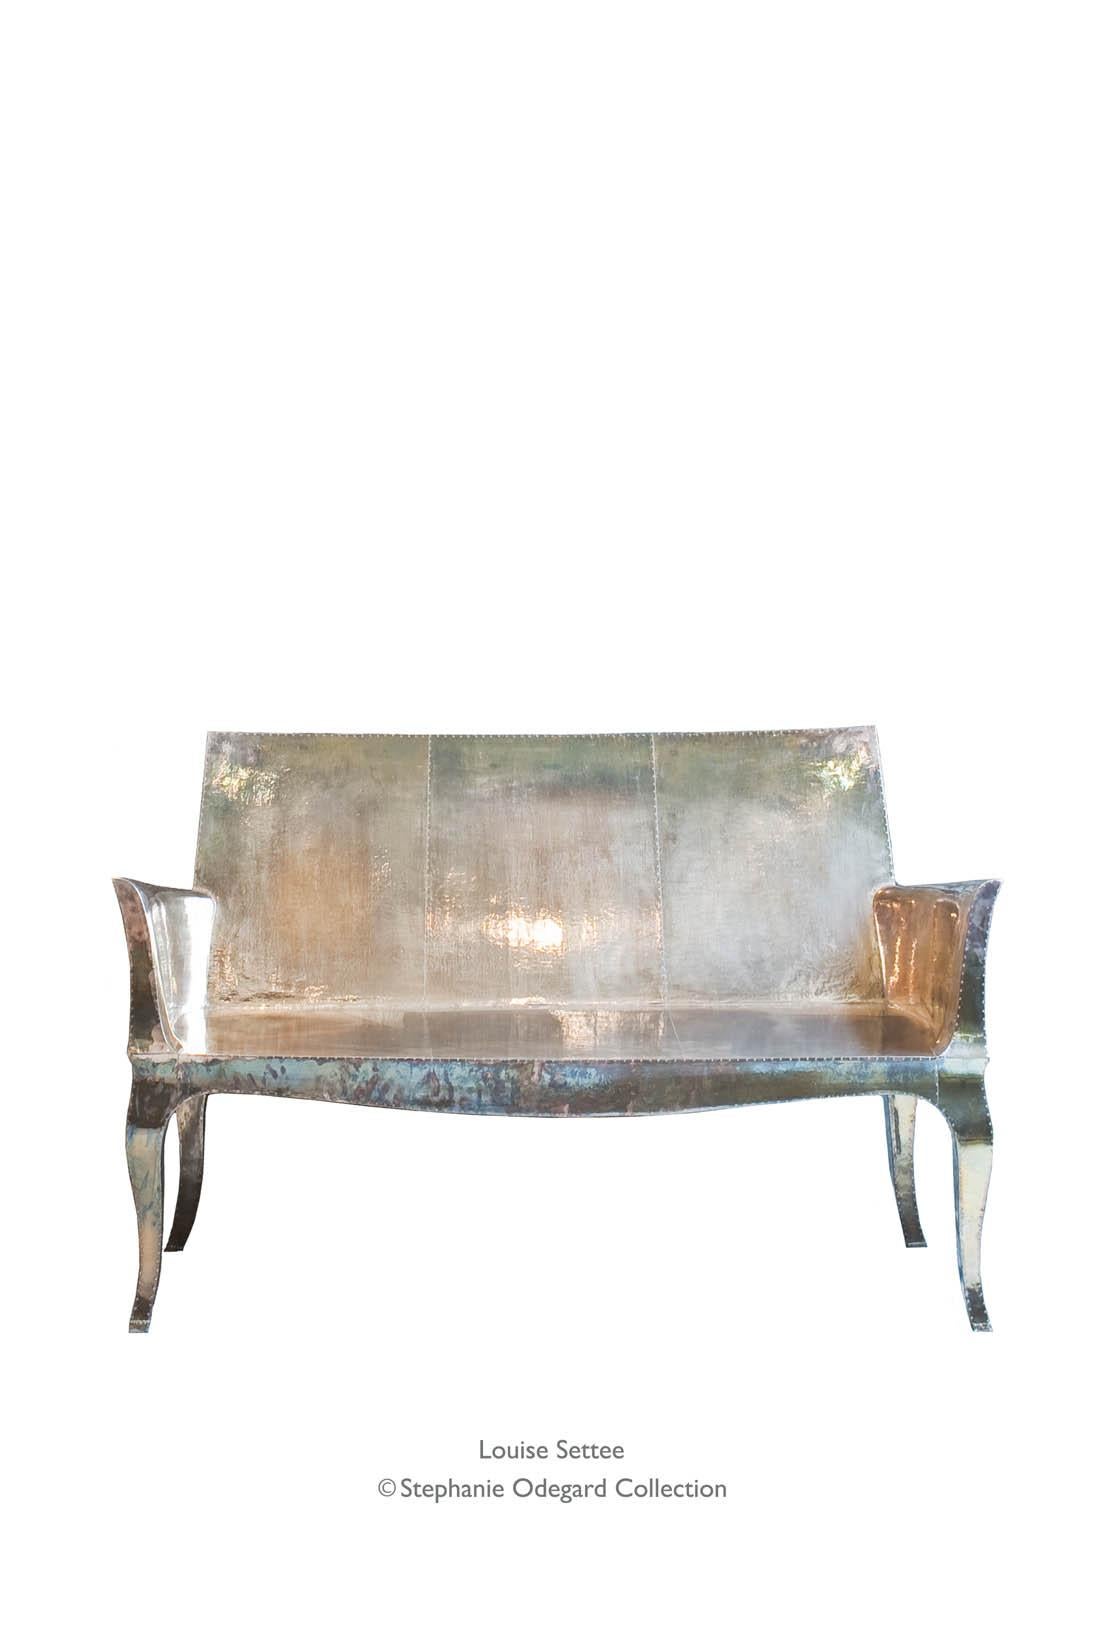 Louise Settee Art Deco Chaise Longues in Mid. Hammered Antique Bronze  For Sale 6